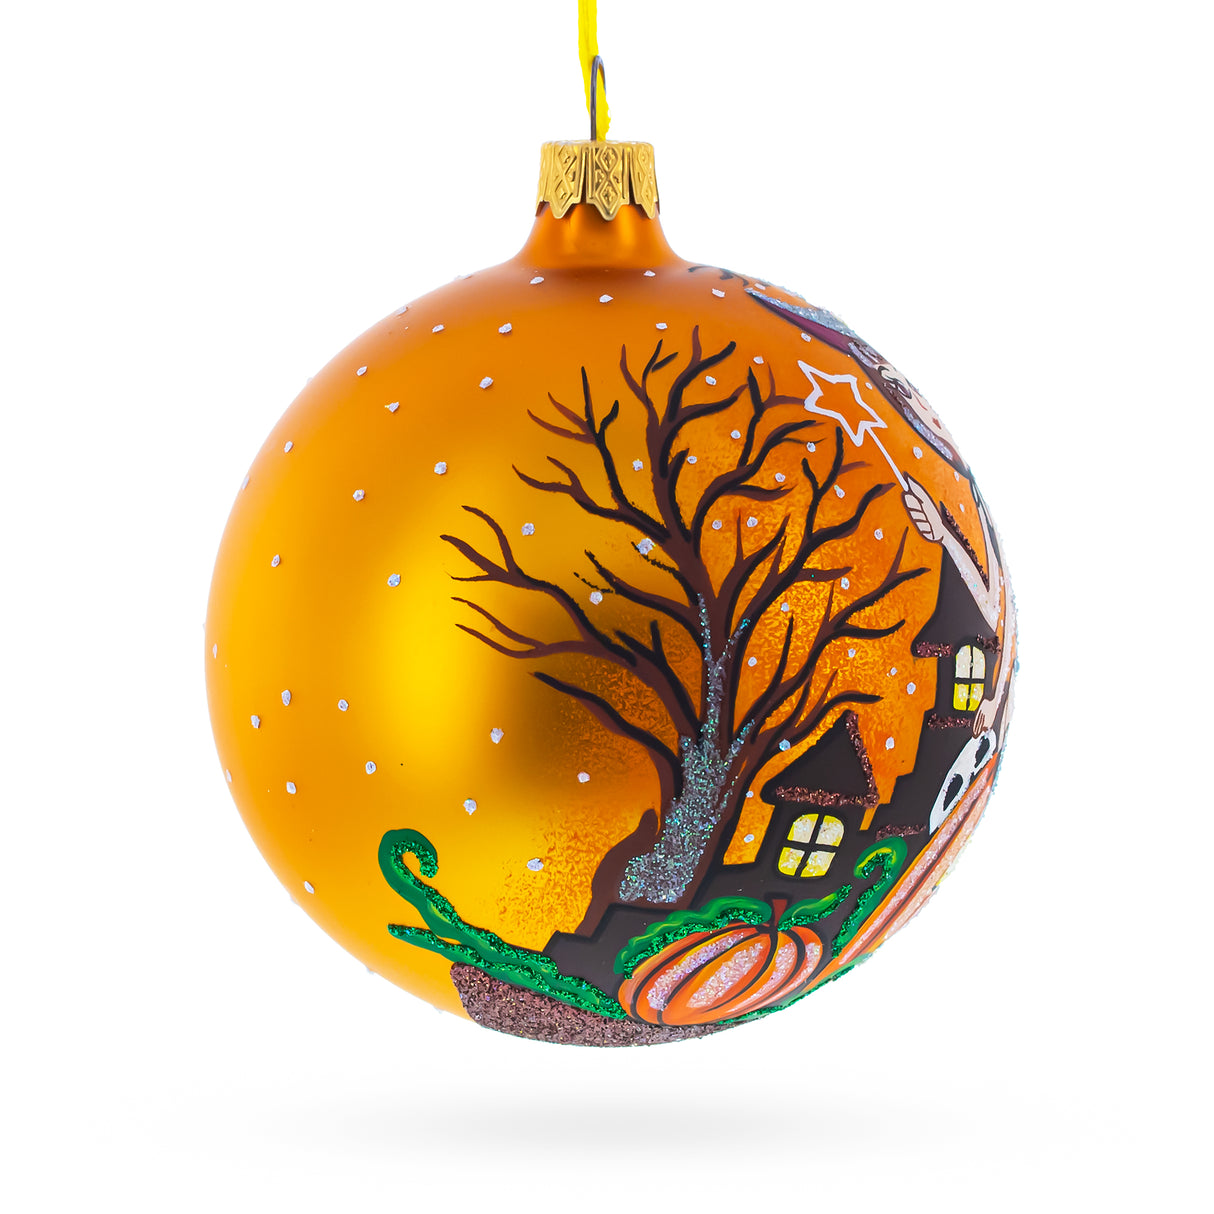 Enchanting Witch Riding Pumpkin Glass Ball Halloween Ornament 4 InchesUkraine ,dimensions in inches: 4 x 4 x 4